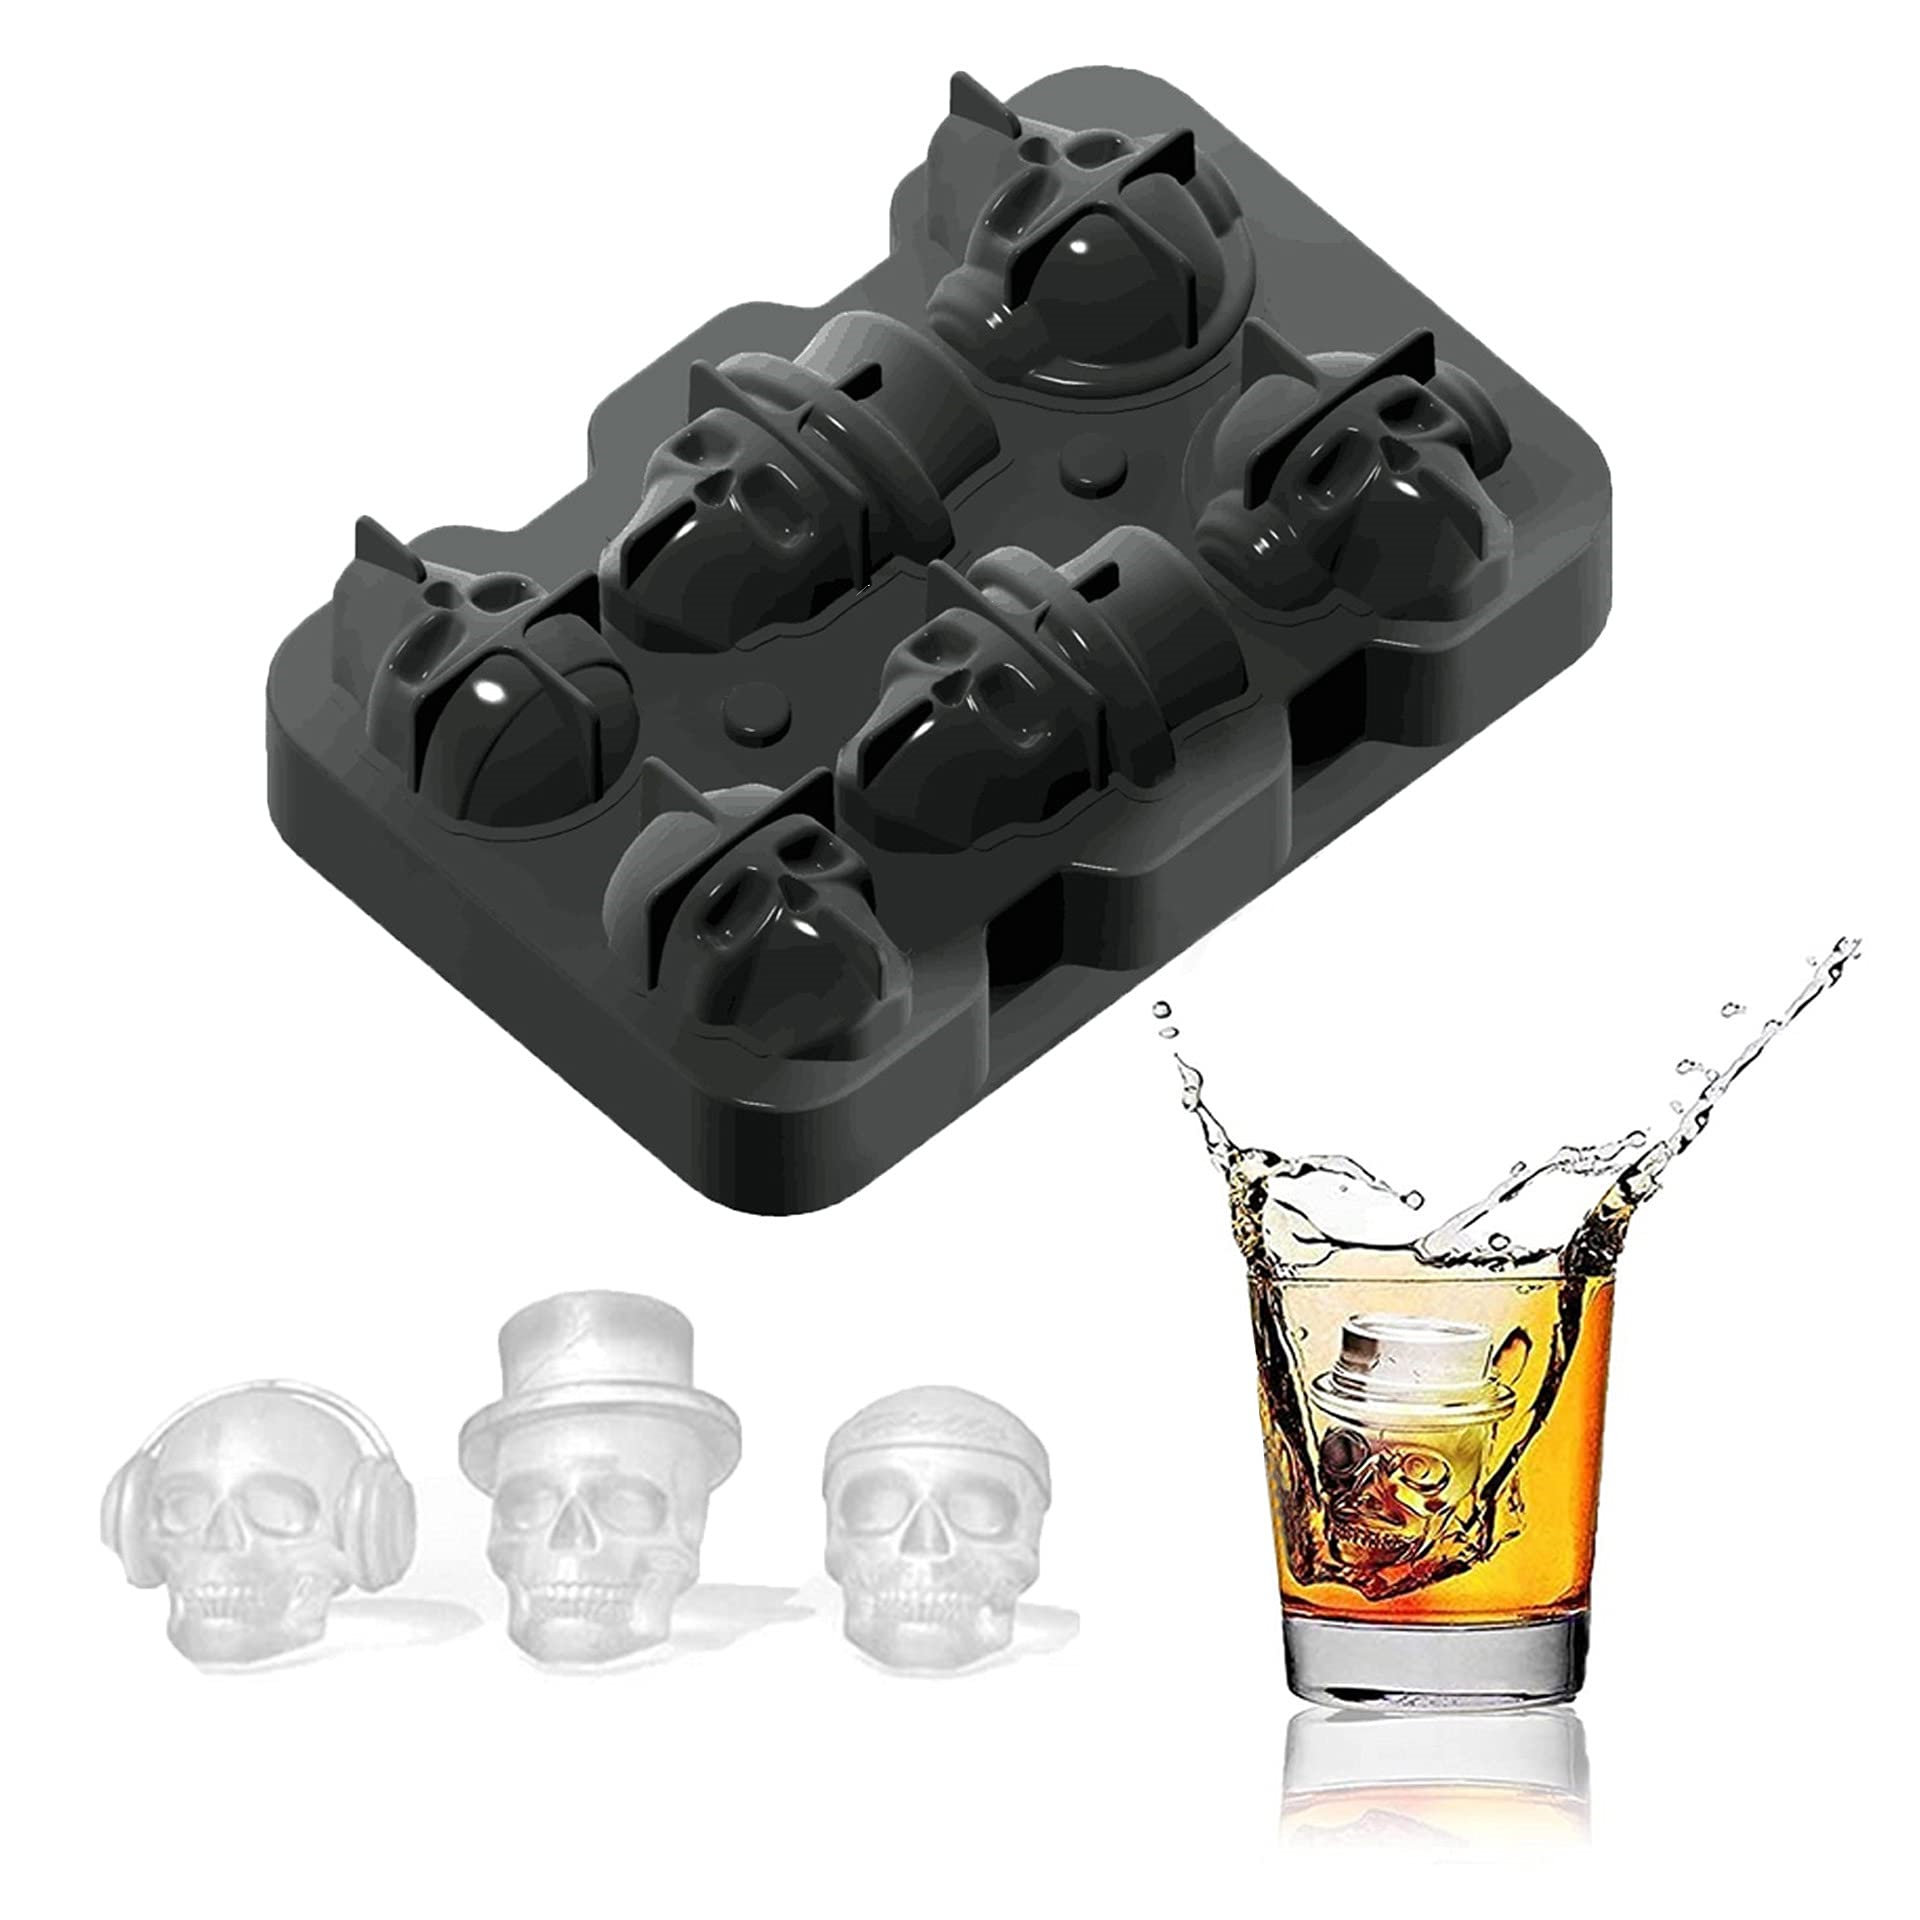 3D Skull Flexible Silicone Ice Cube Maker for Whiskey Drinks Holiday Gifts Ice Cube Trays Mold Makes Giant Iced Skulls BPA Free